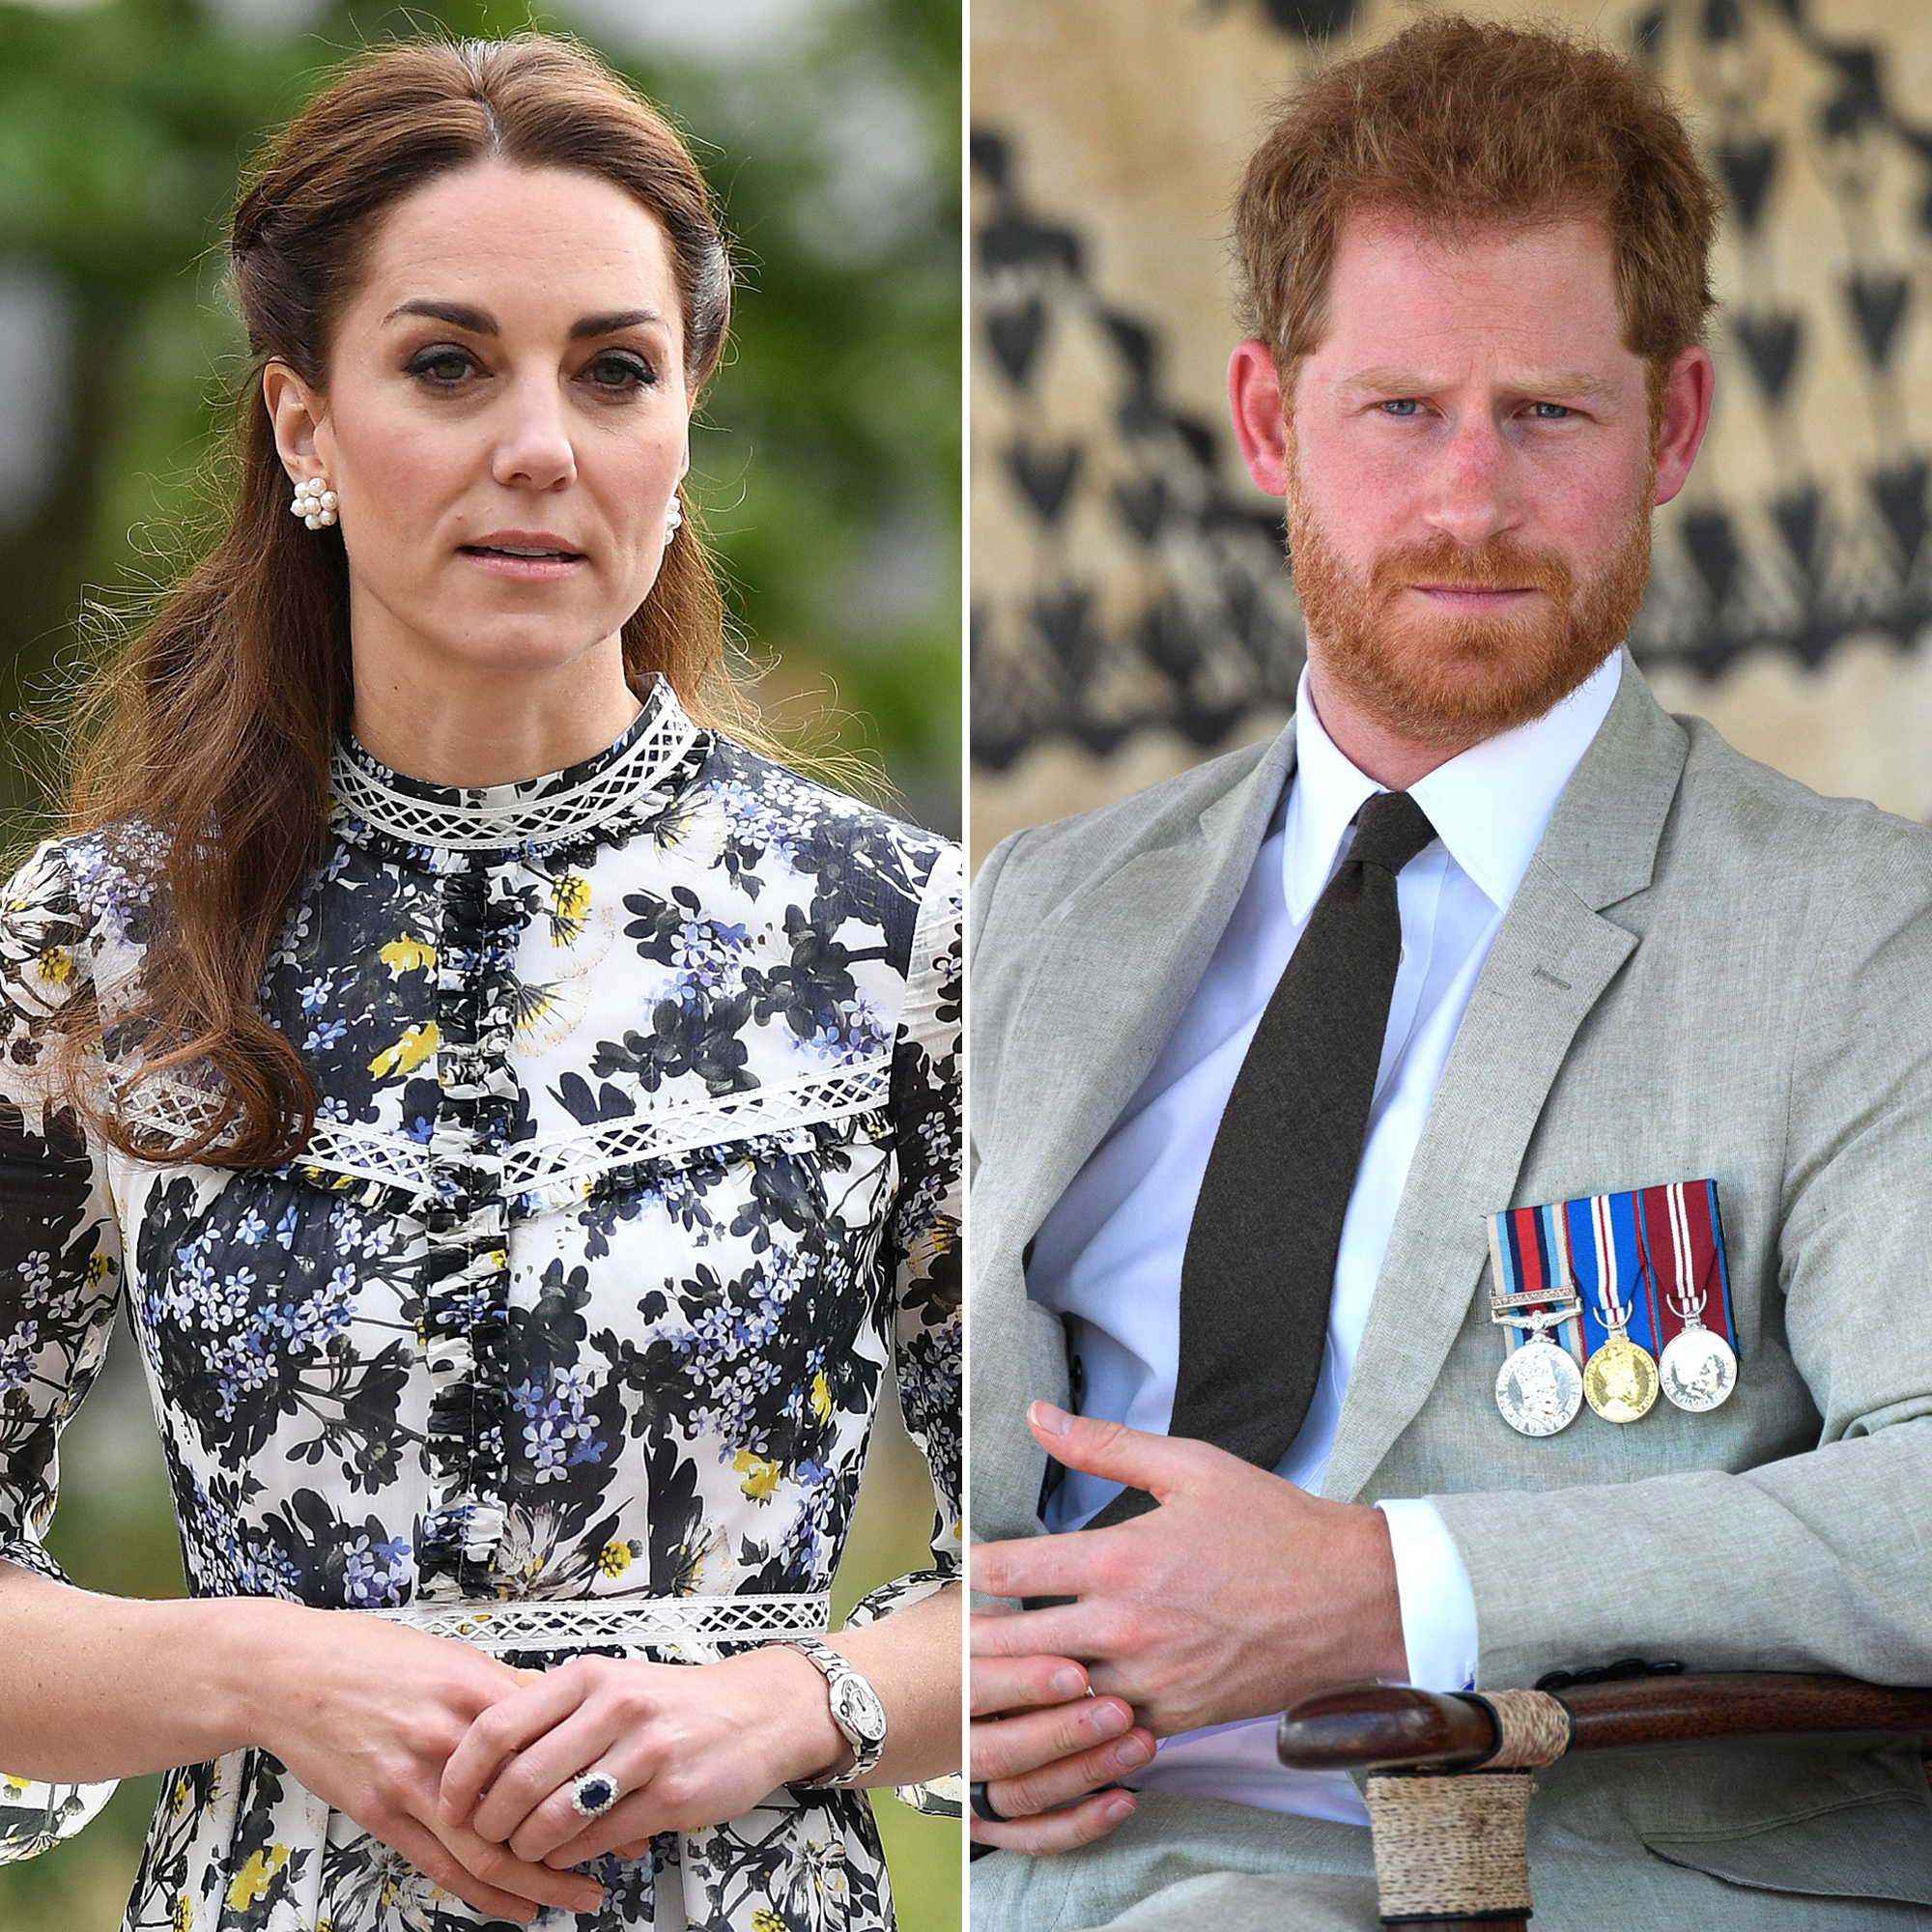 Is 'Appalled' at Prince Harry's 'Spare'